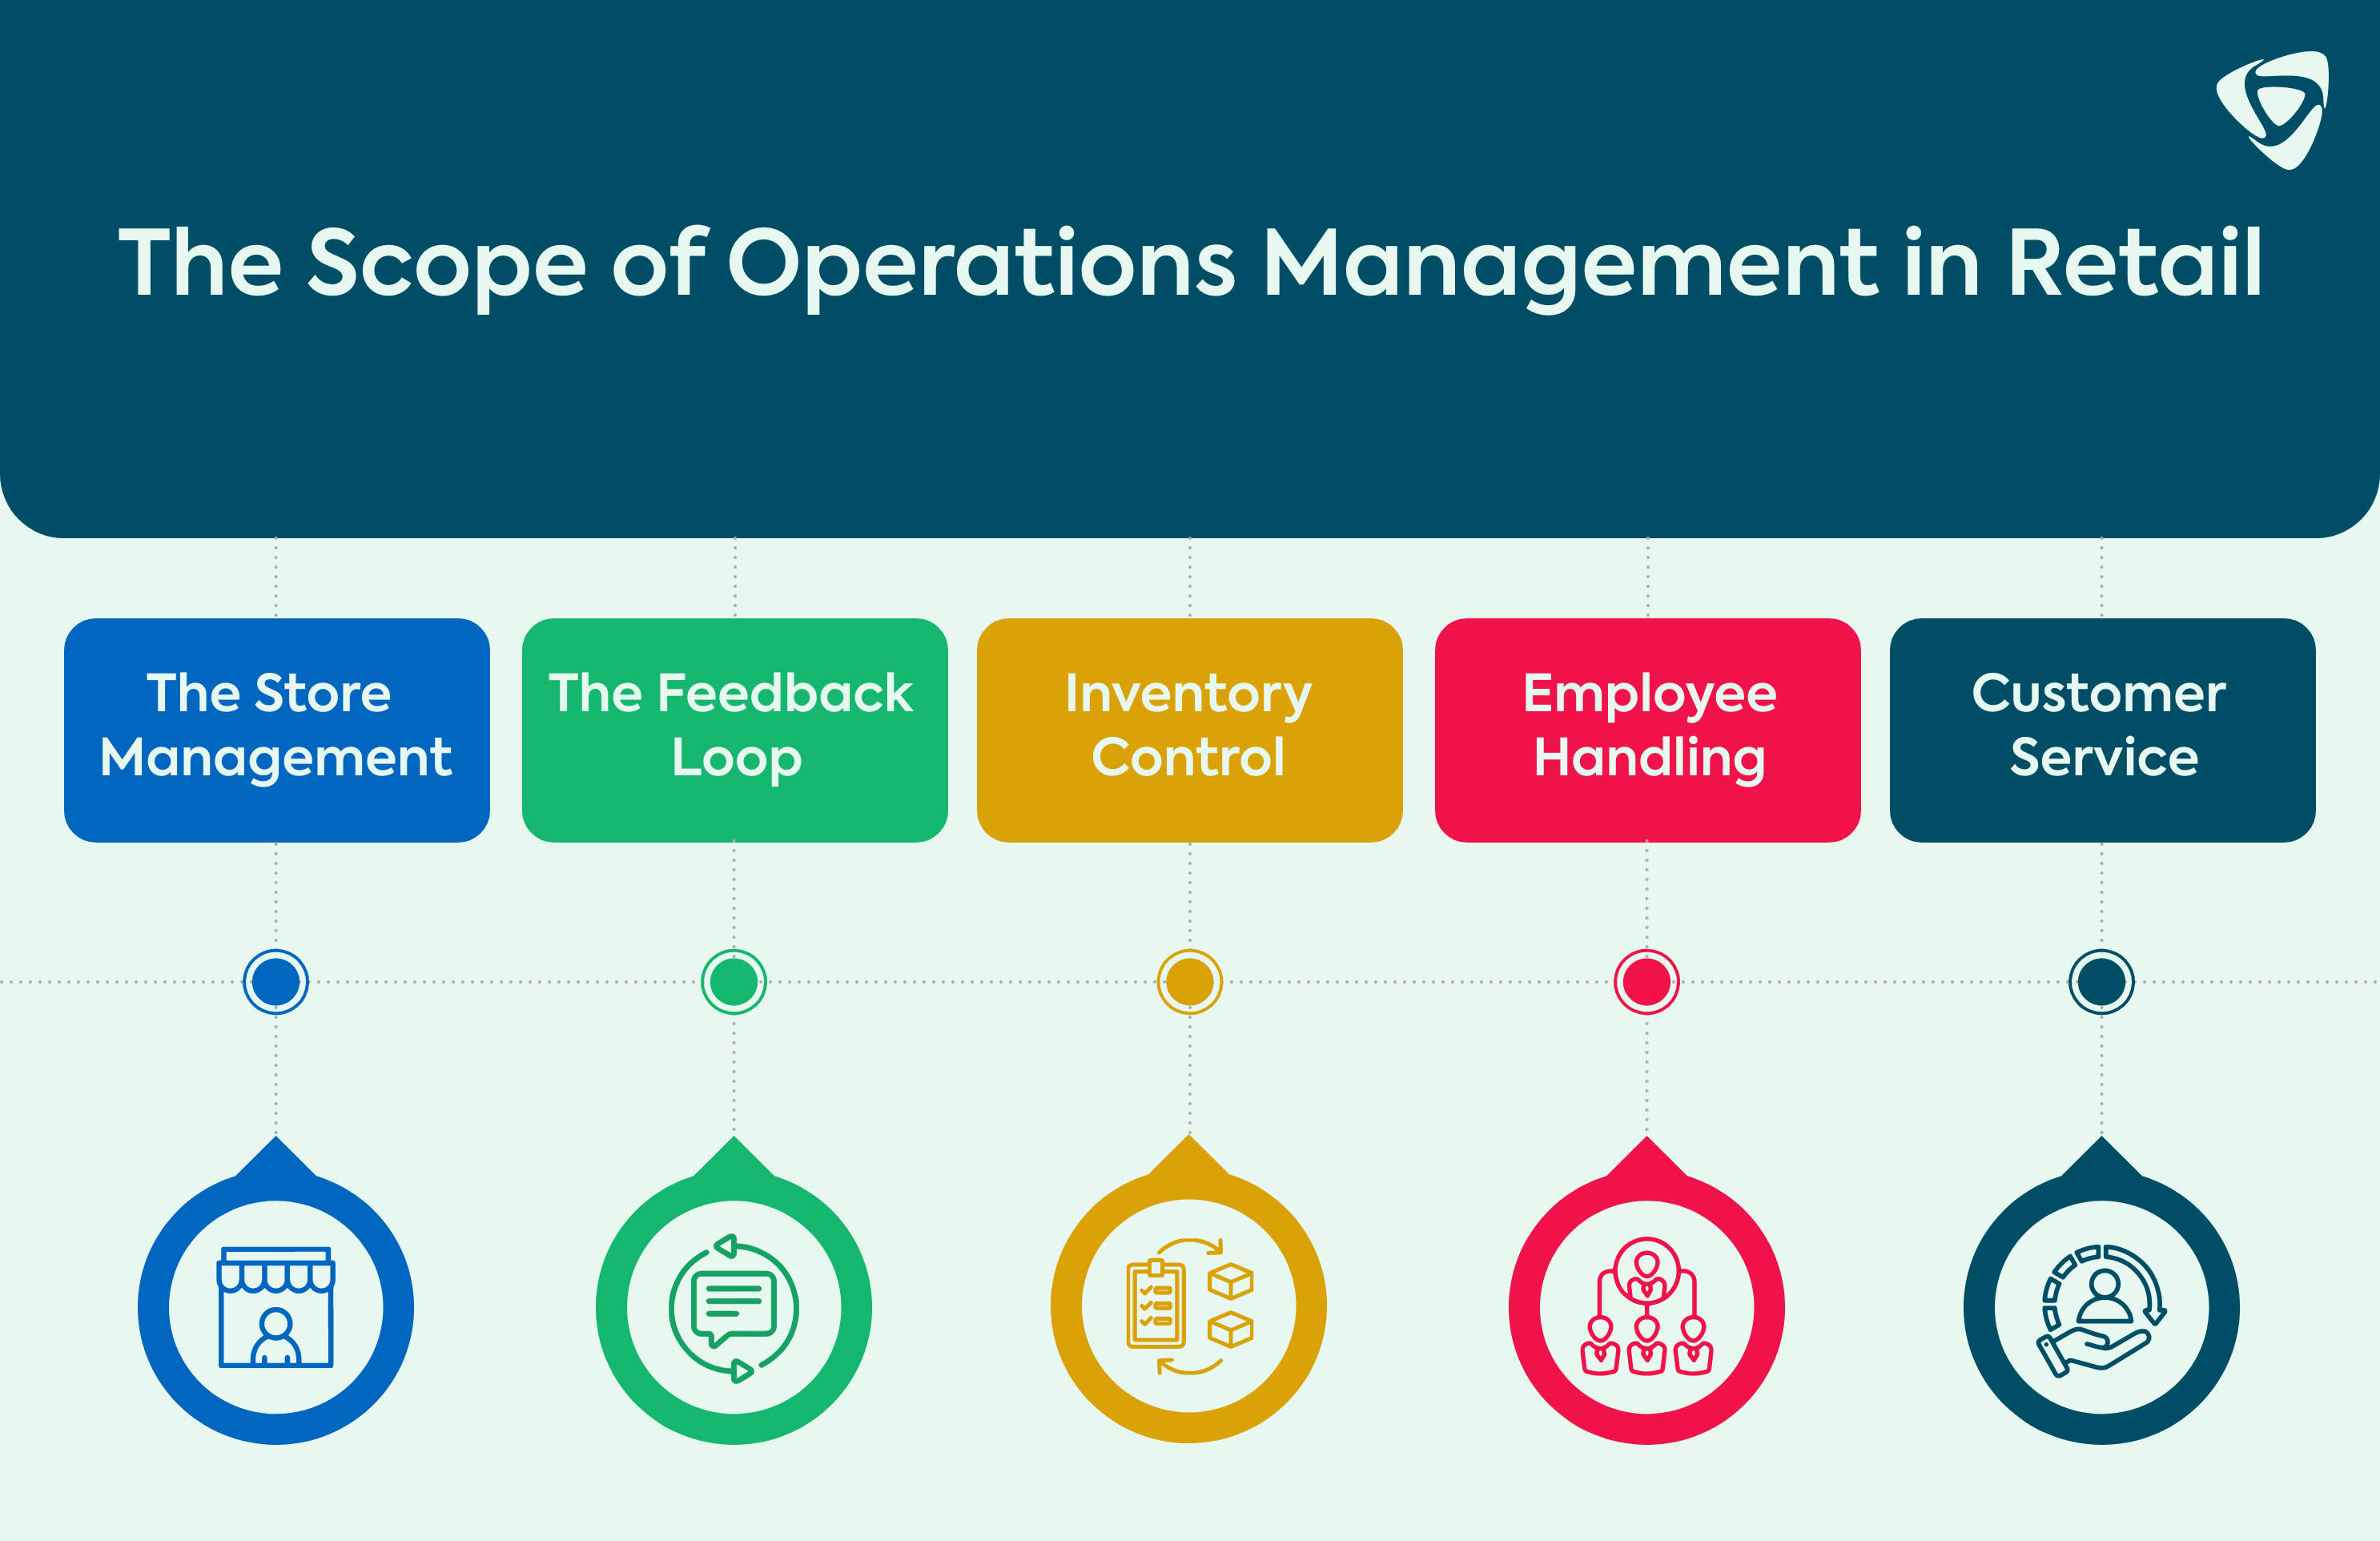 The scope of operations management in retail